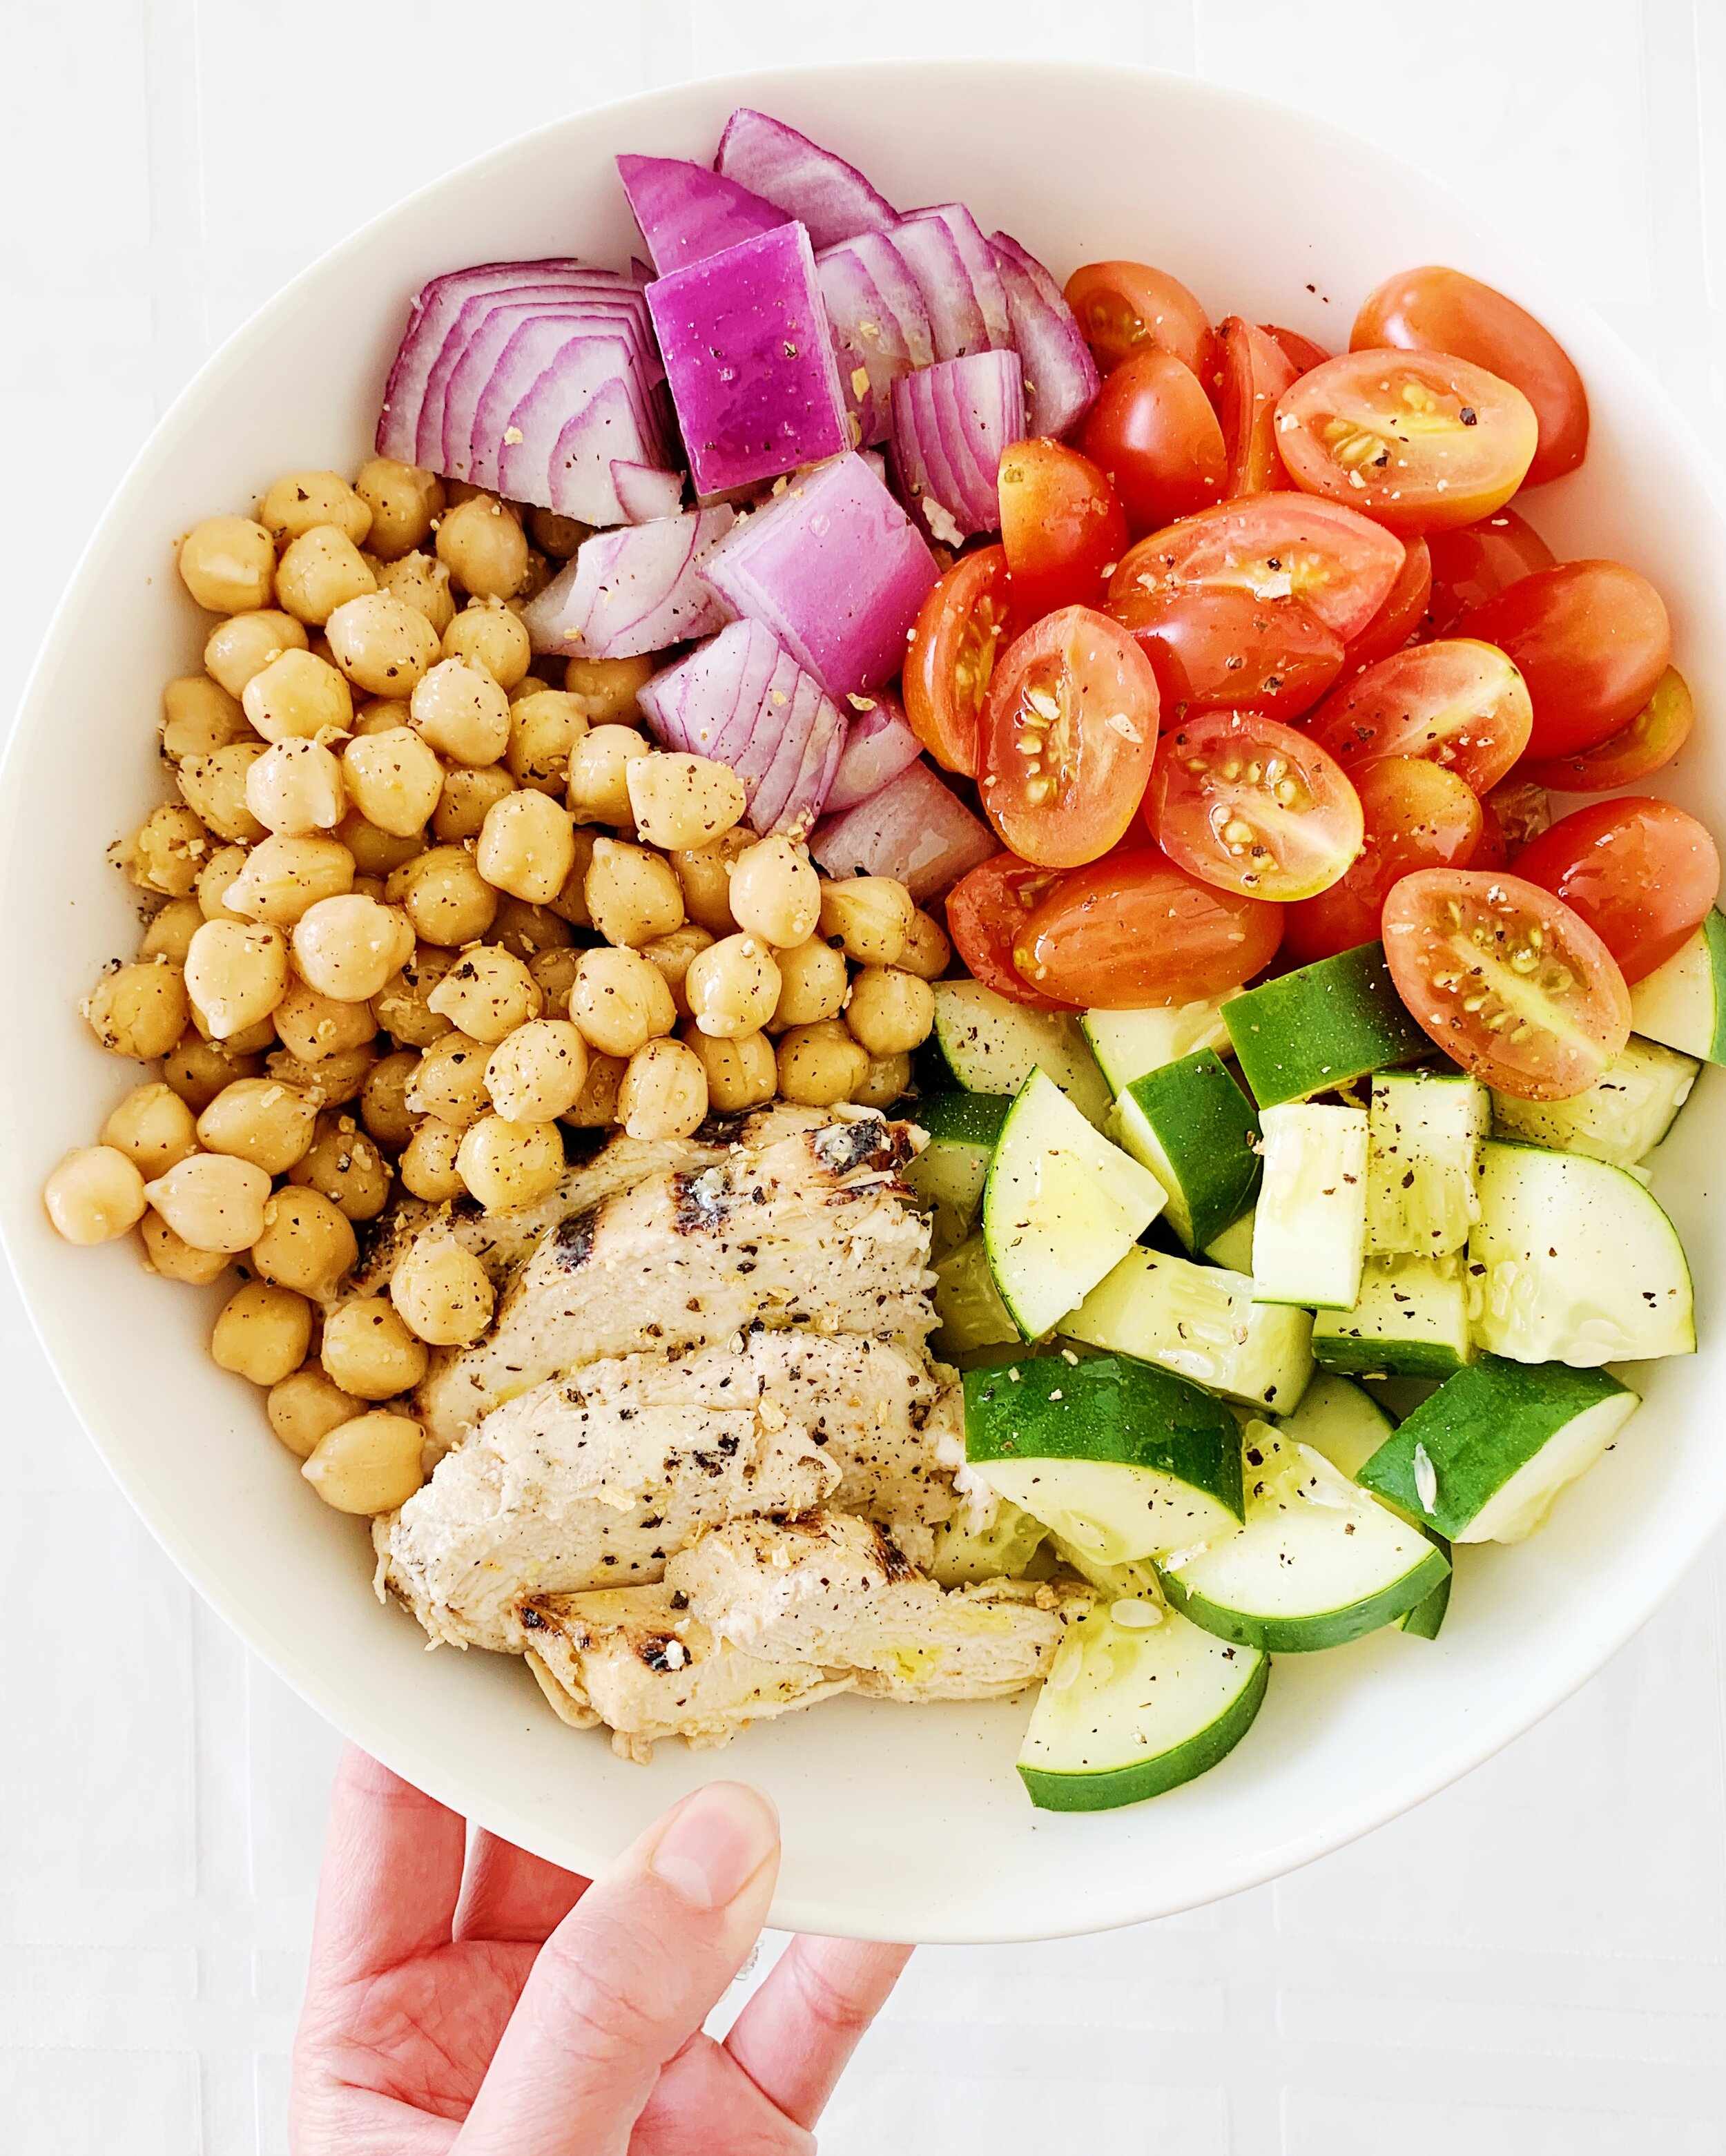 Lettuce-less salad with chickpeas, tomatoes, cukes, onions, and grilled chicken 